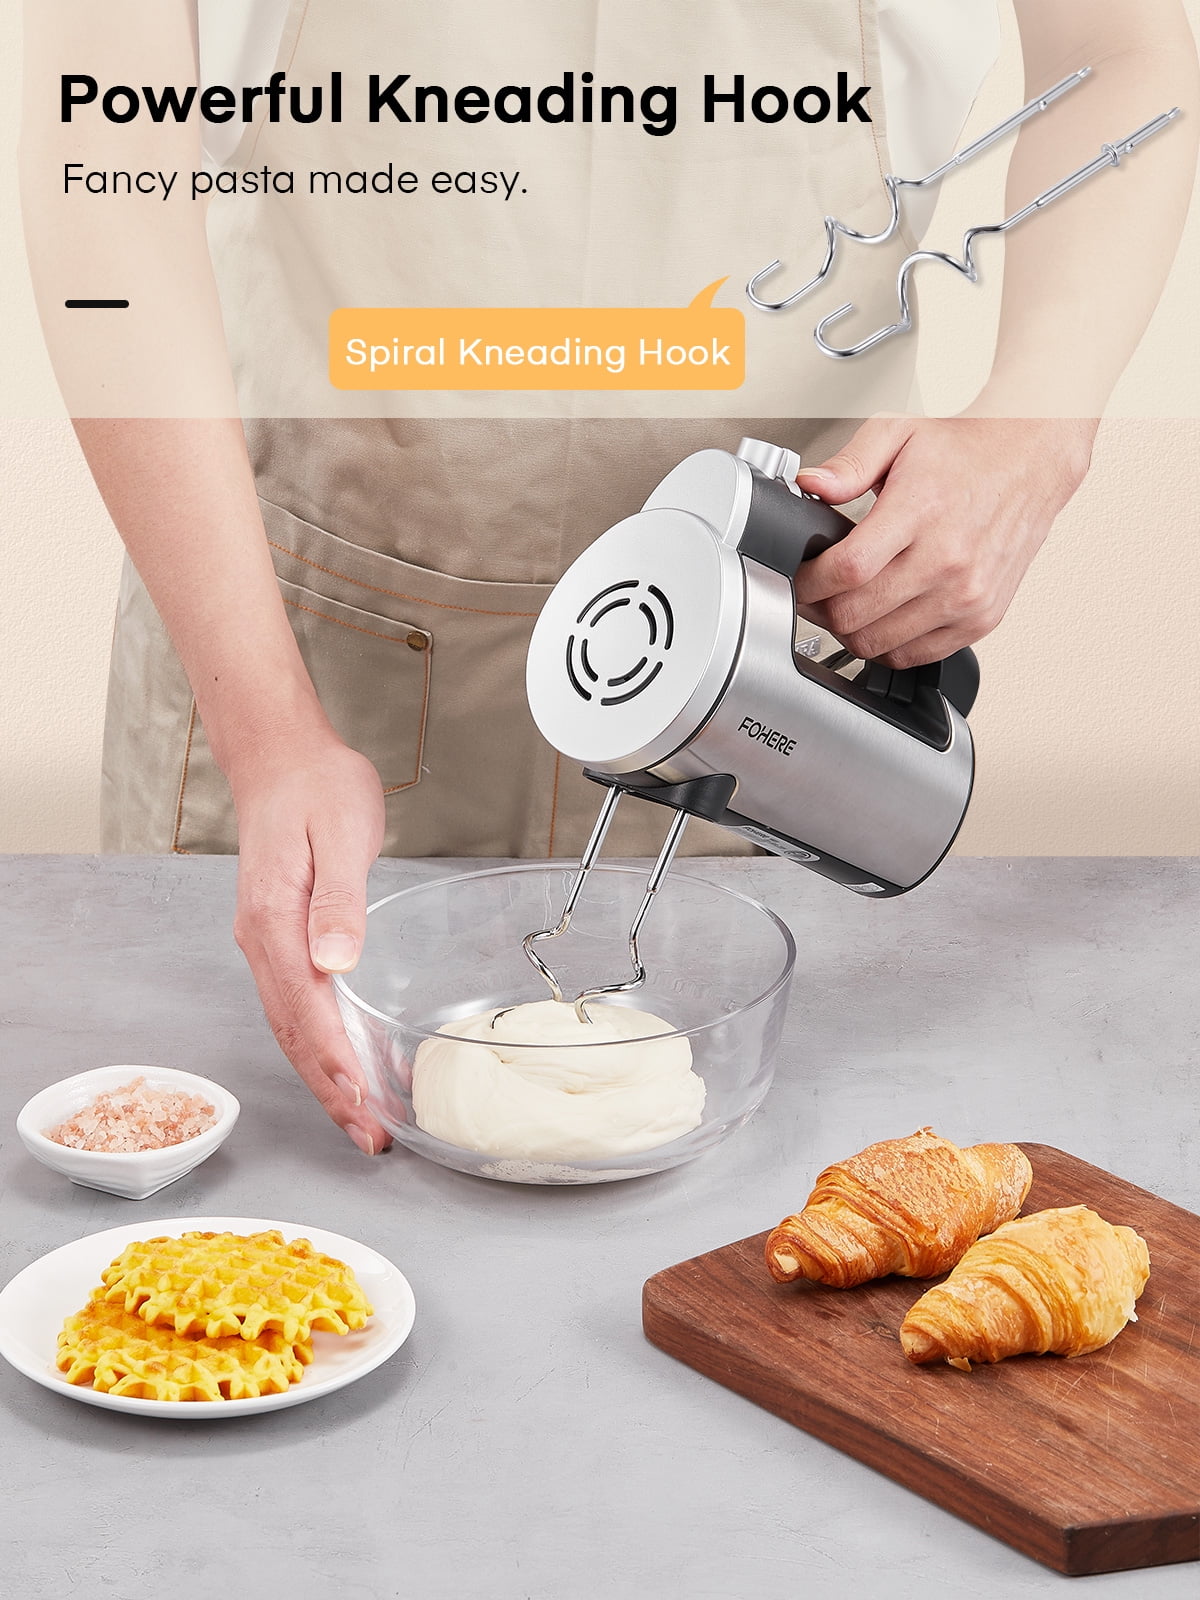 REDMOND Hand Mixer Electric, 5-Speed 300W Power Handheld Kitchen Mixer with  Turbo Mode, Kitchen Mixer with Attachment(2 Beaters, 2 Dough Hooks),Cake  Mixer, Hand Mixer for Baking